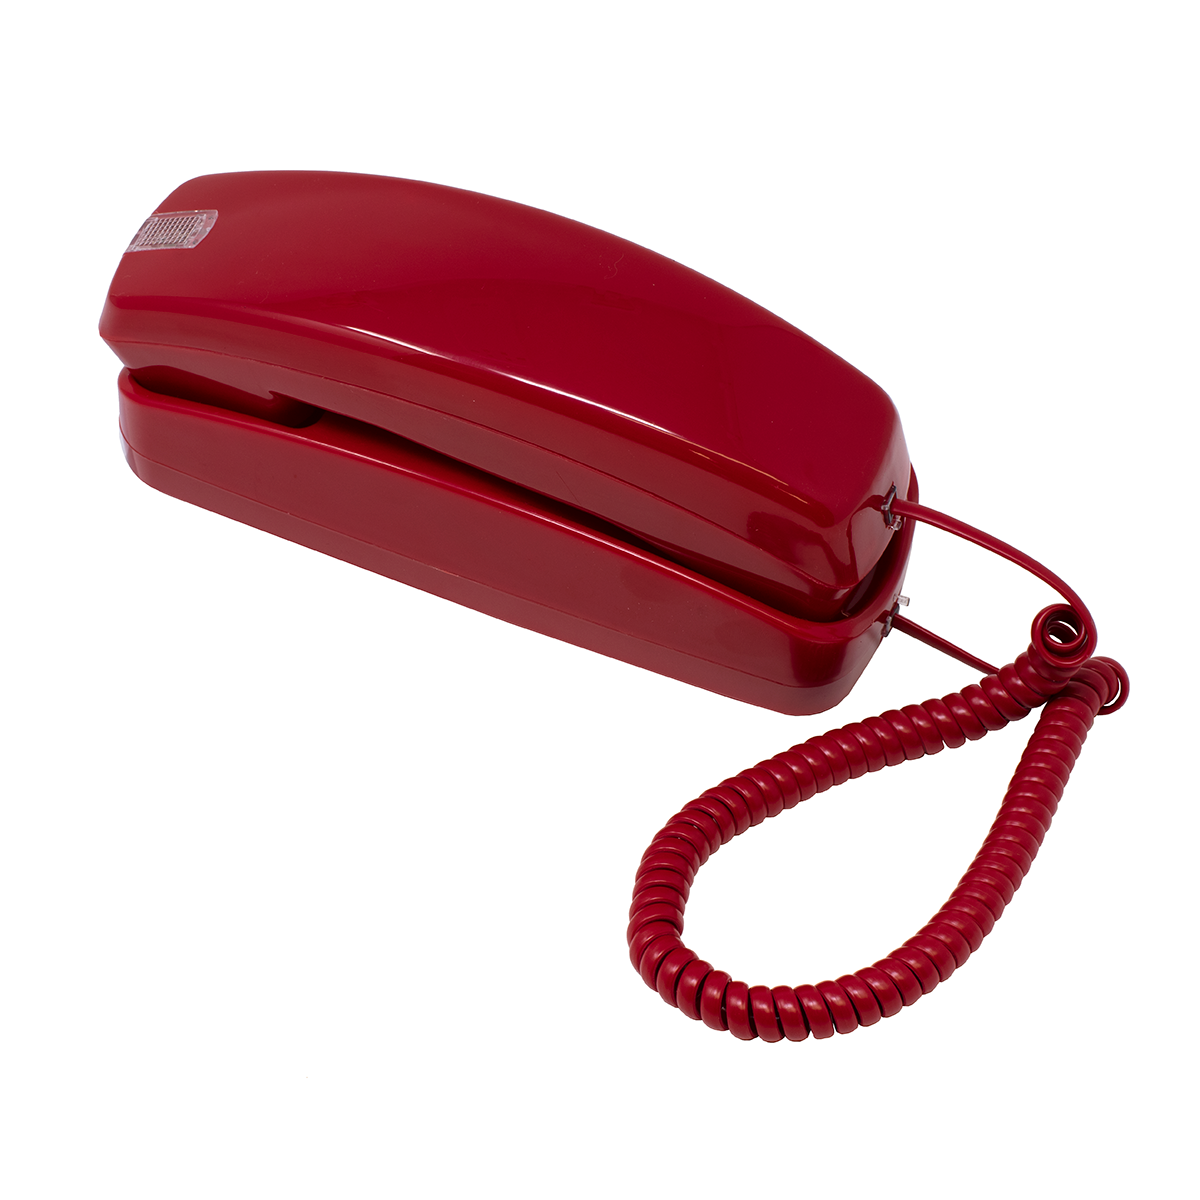 Trimline Red Analog Telephone (Top View)